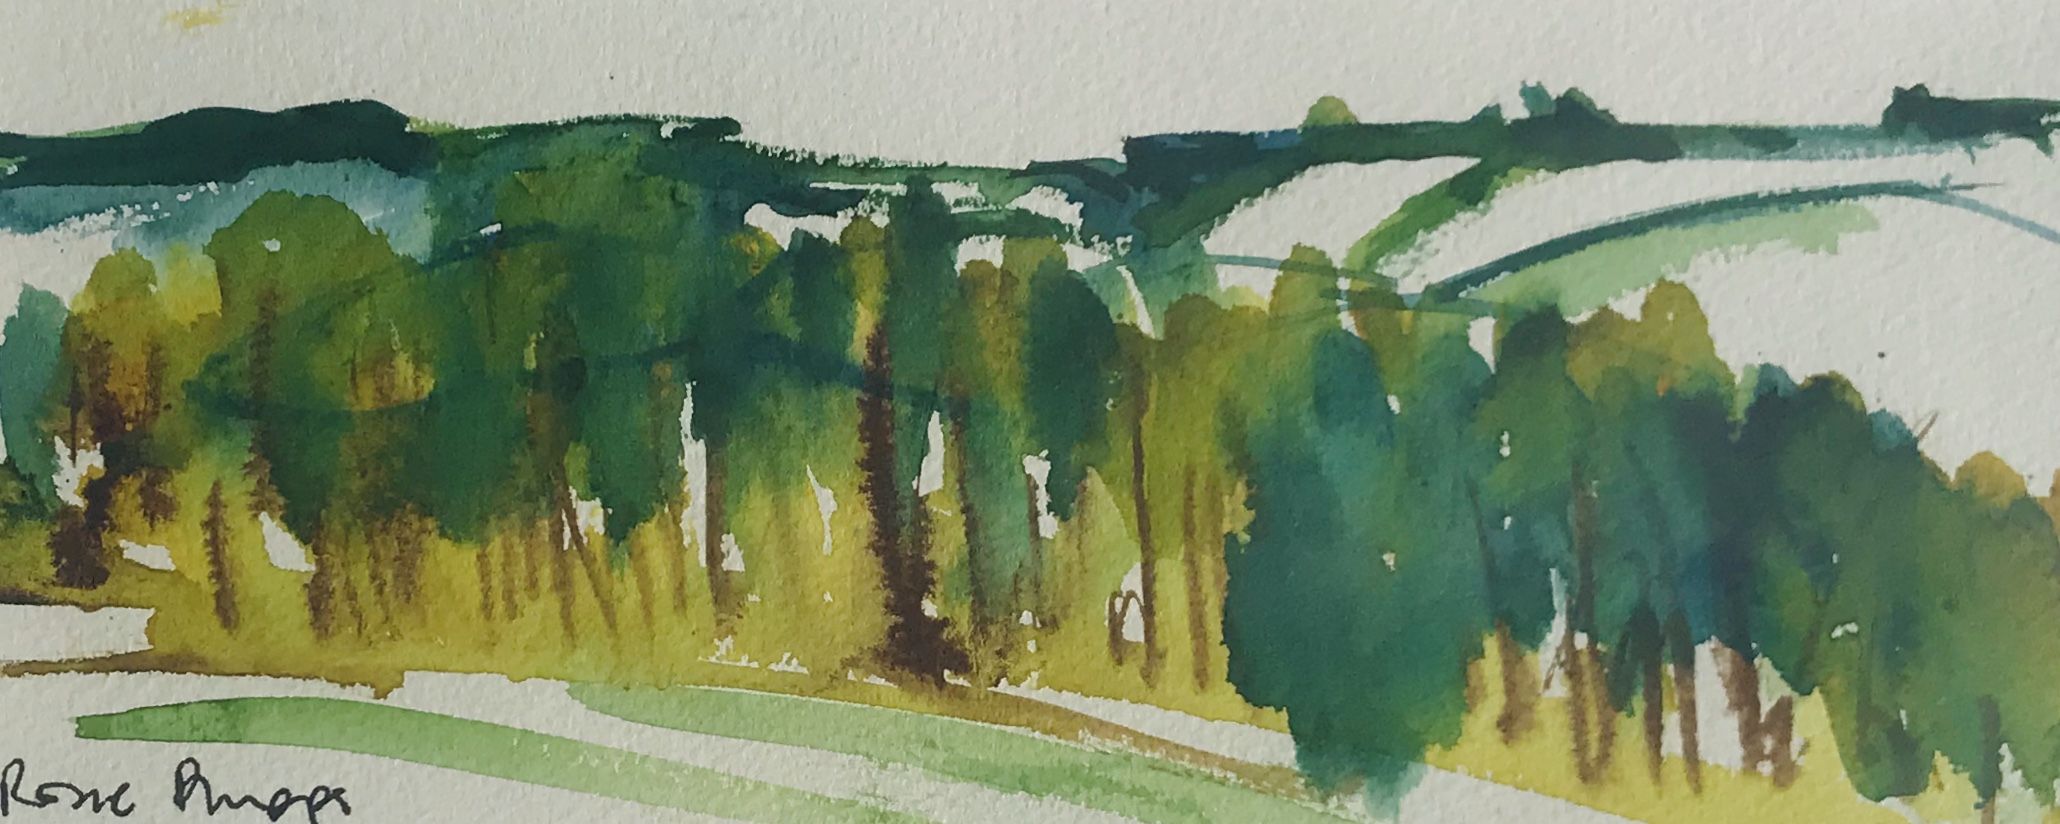 Cotswold Trees III by Rosie Phipps